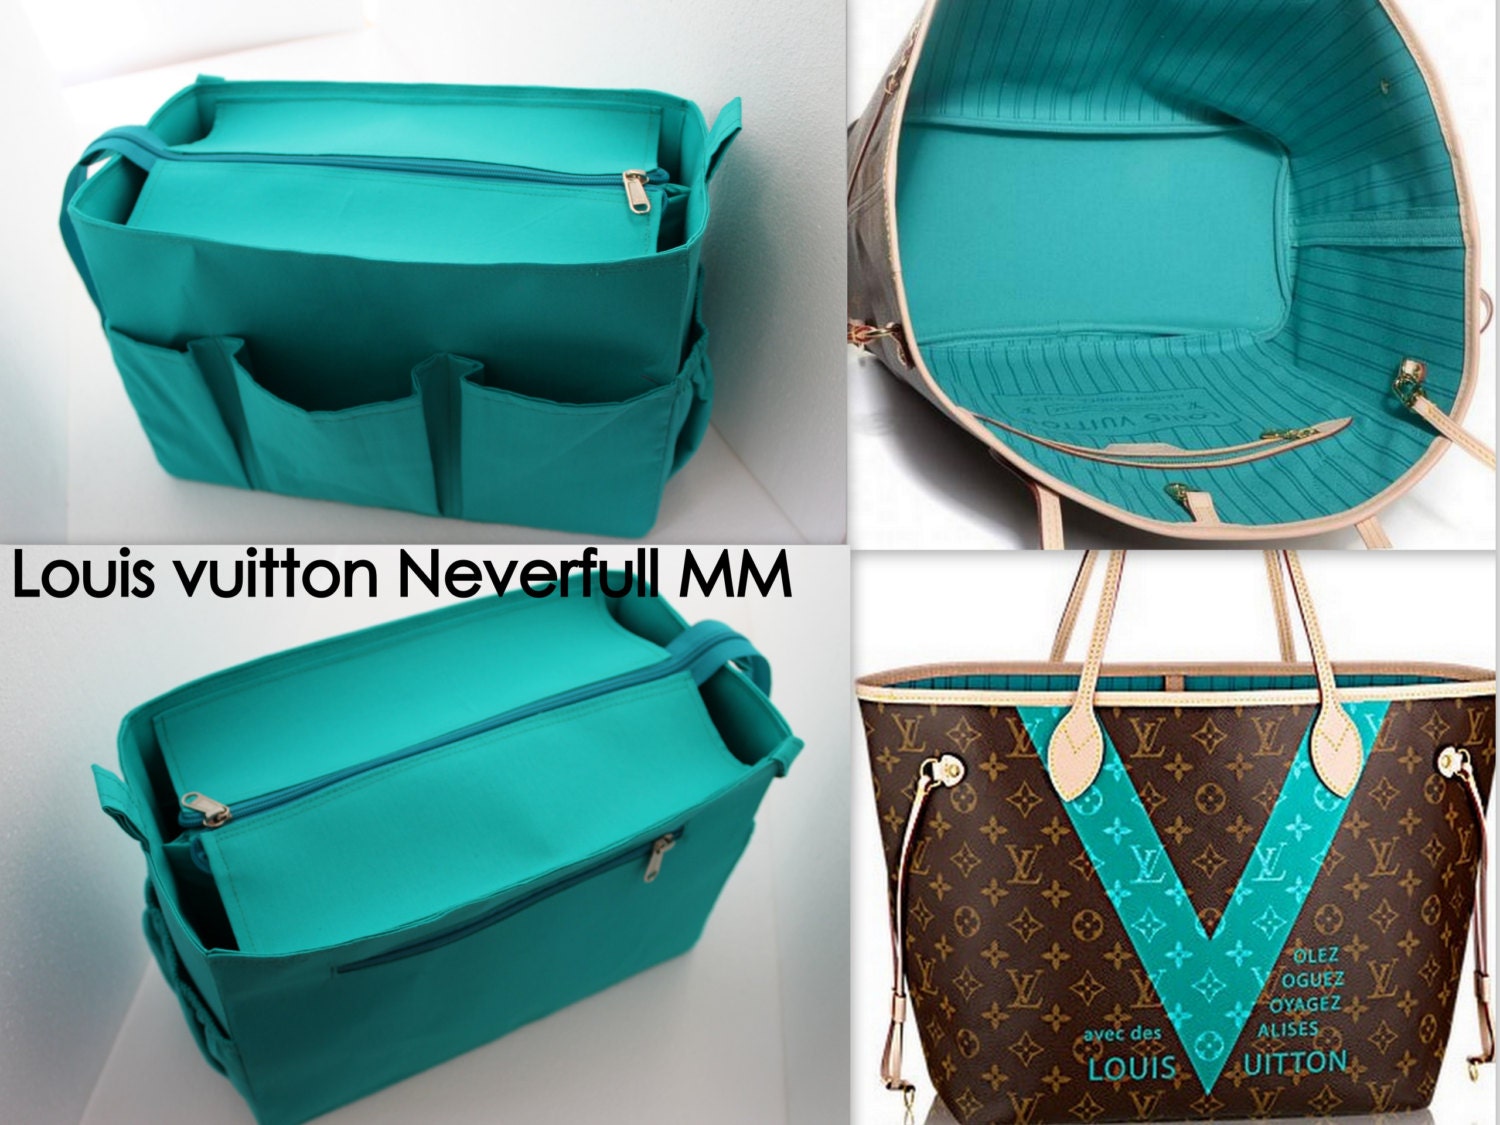 Authentic Louis Vuitton Monogram Neverfull Pouch Turquoise.